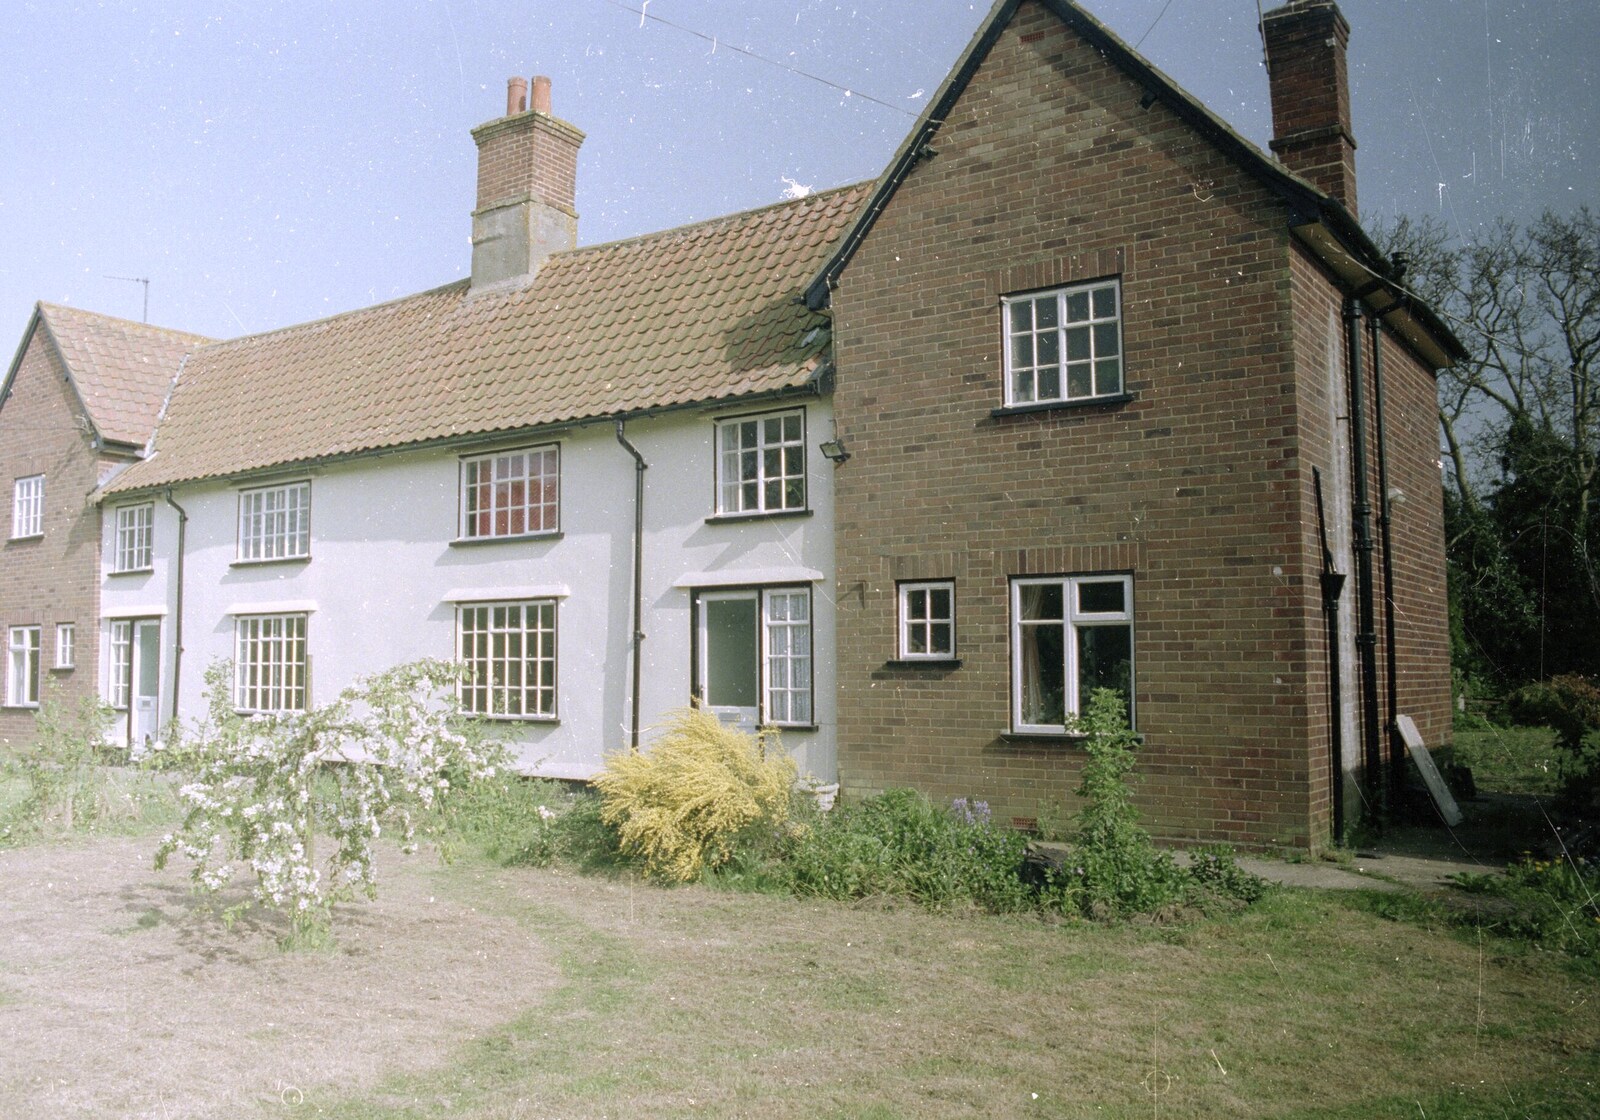 The front of the house now looks vaguely tidy from A Clays Trip to Calais, and Sorting Out The Garden, Suffolk - 18th May 1994